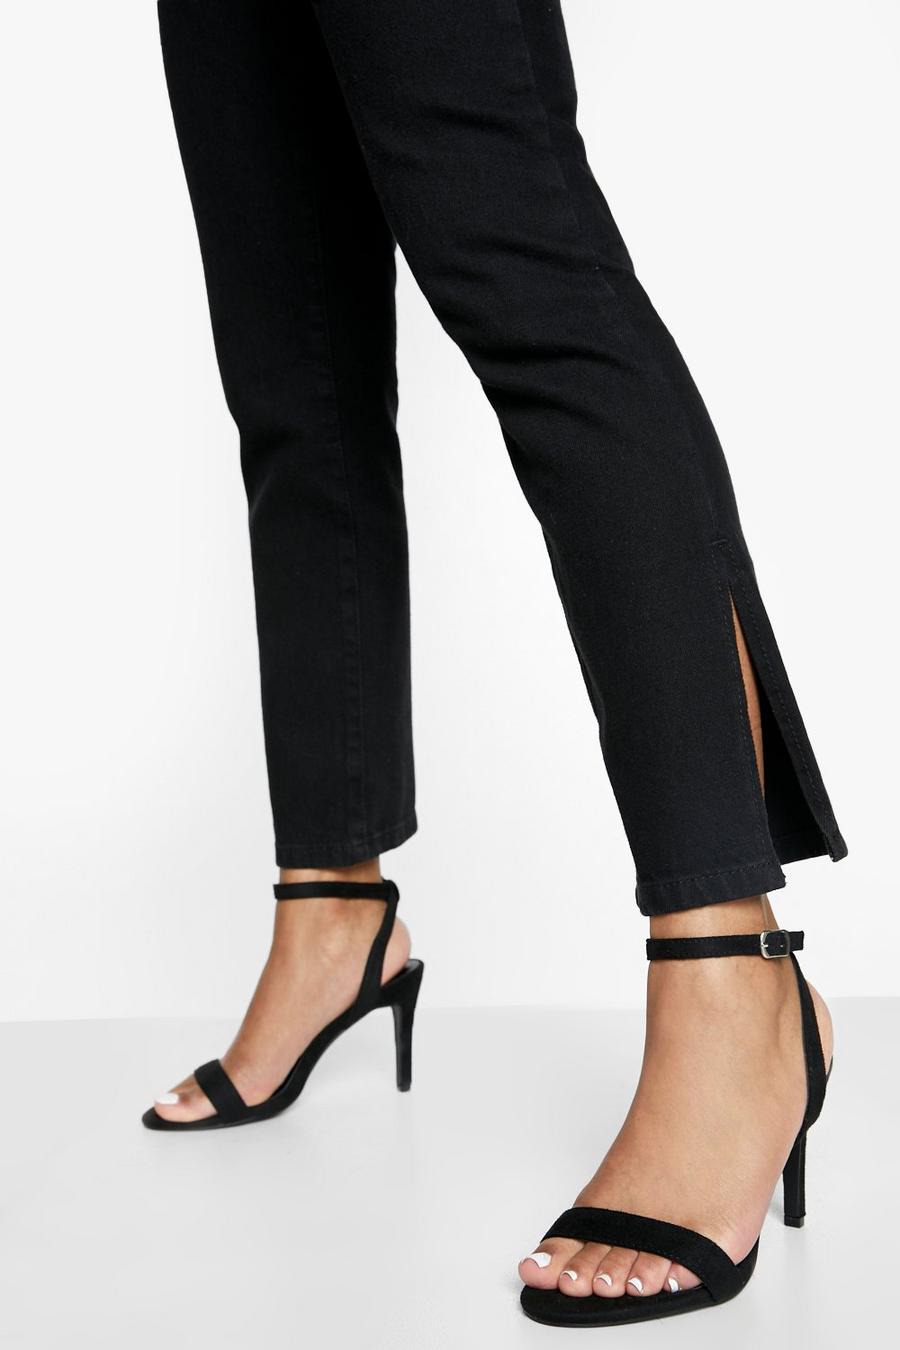 Black noir Low Barely There Heels